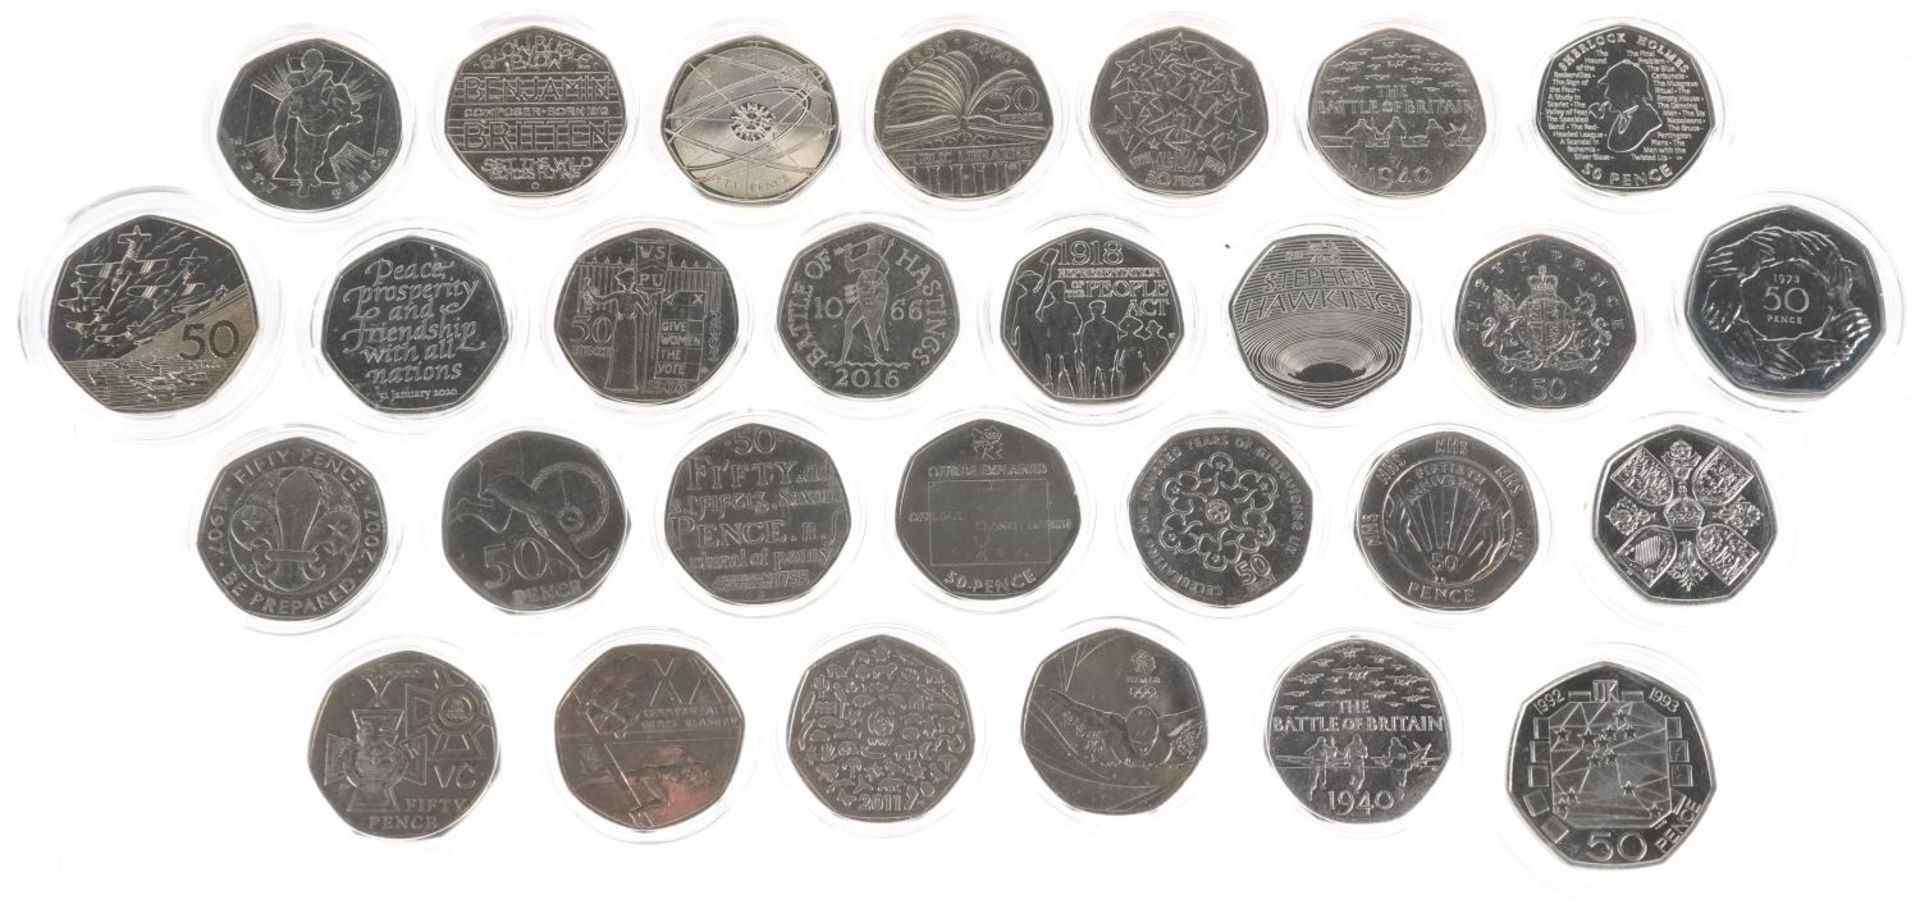 Twenty eight Elizabeth II fifty pence pieces, various designs including Scouts Be Prepared, London